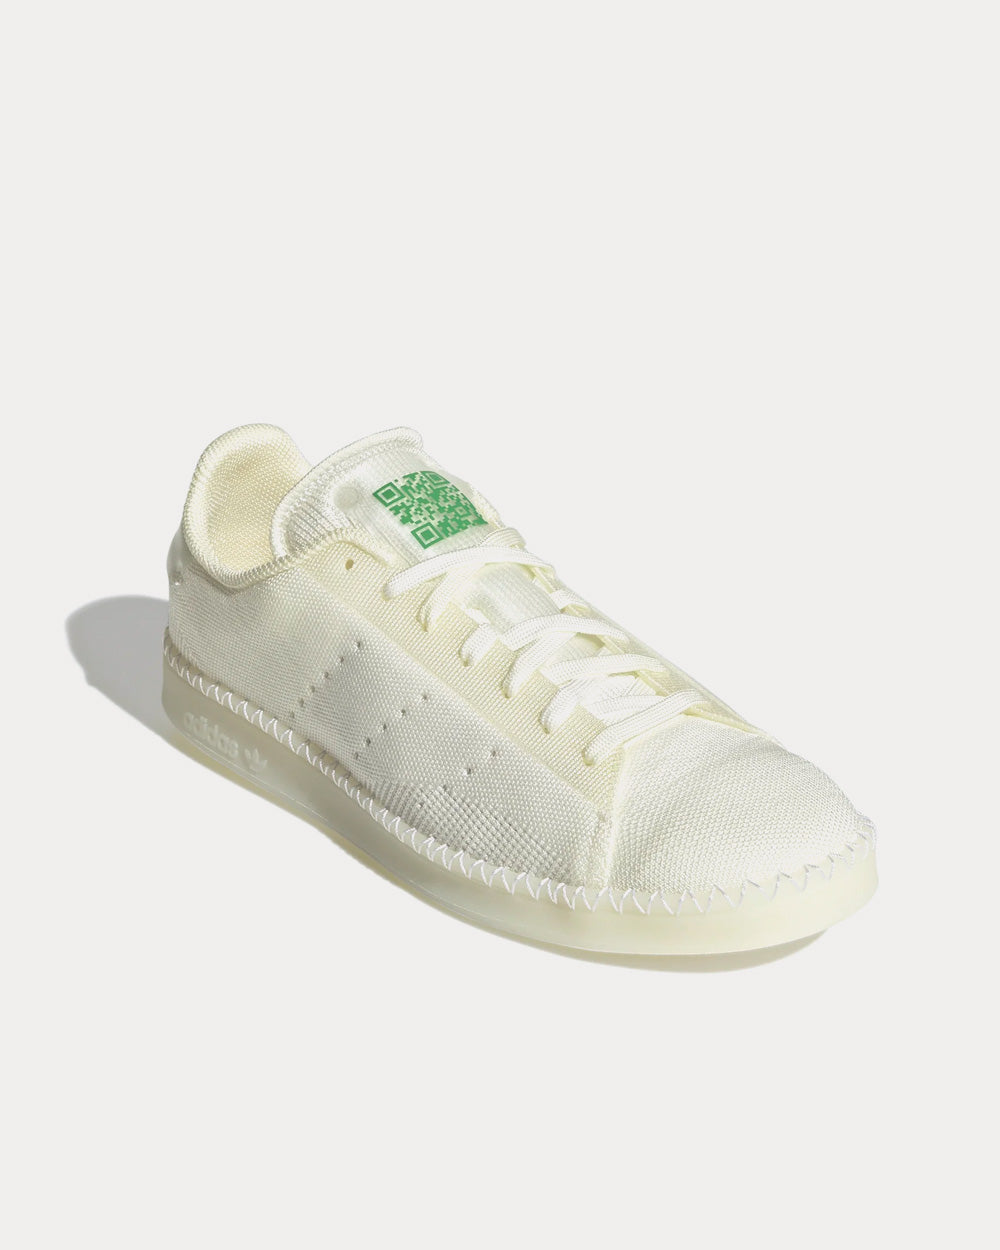 Adidas - Stan Smith MTBR Non Dyed / Non Dyed / Green Low Top Sneakers